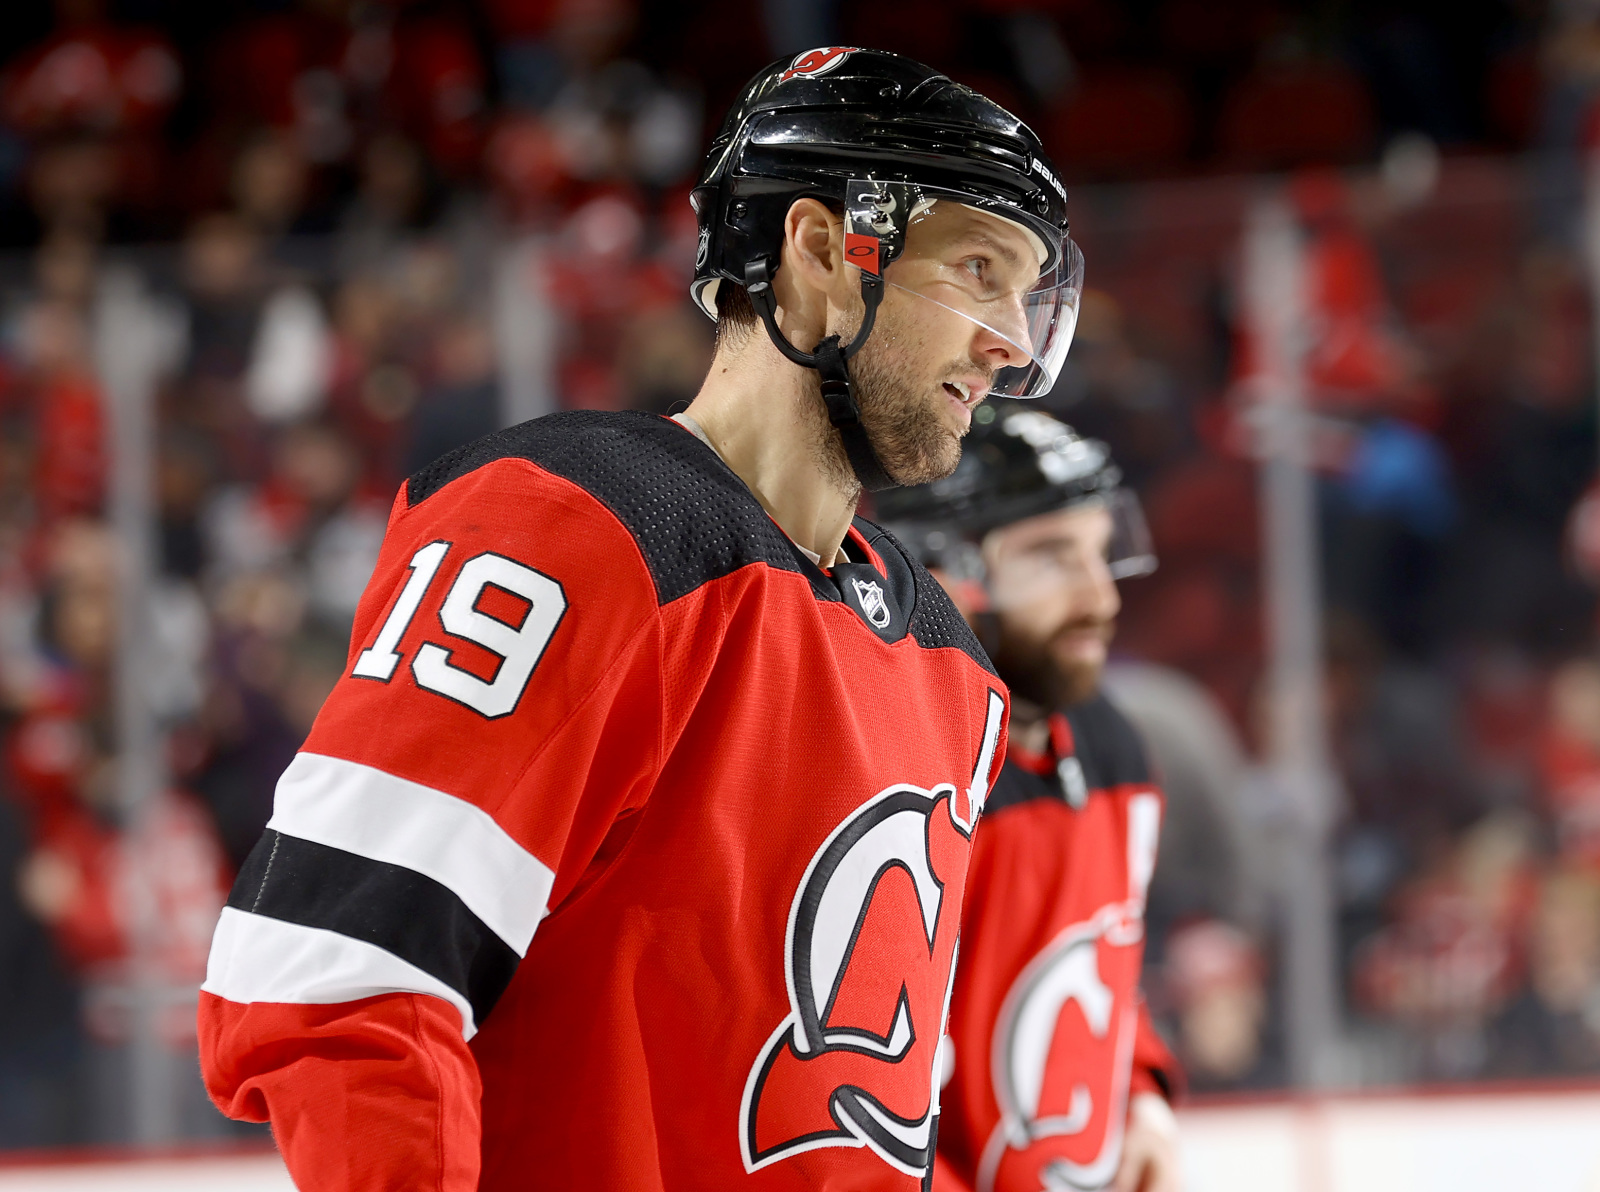 Devils' top centre Travis Zajac out 4-6 months with pectoral injury